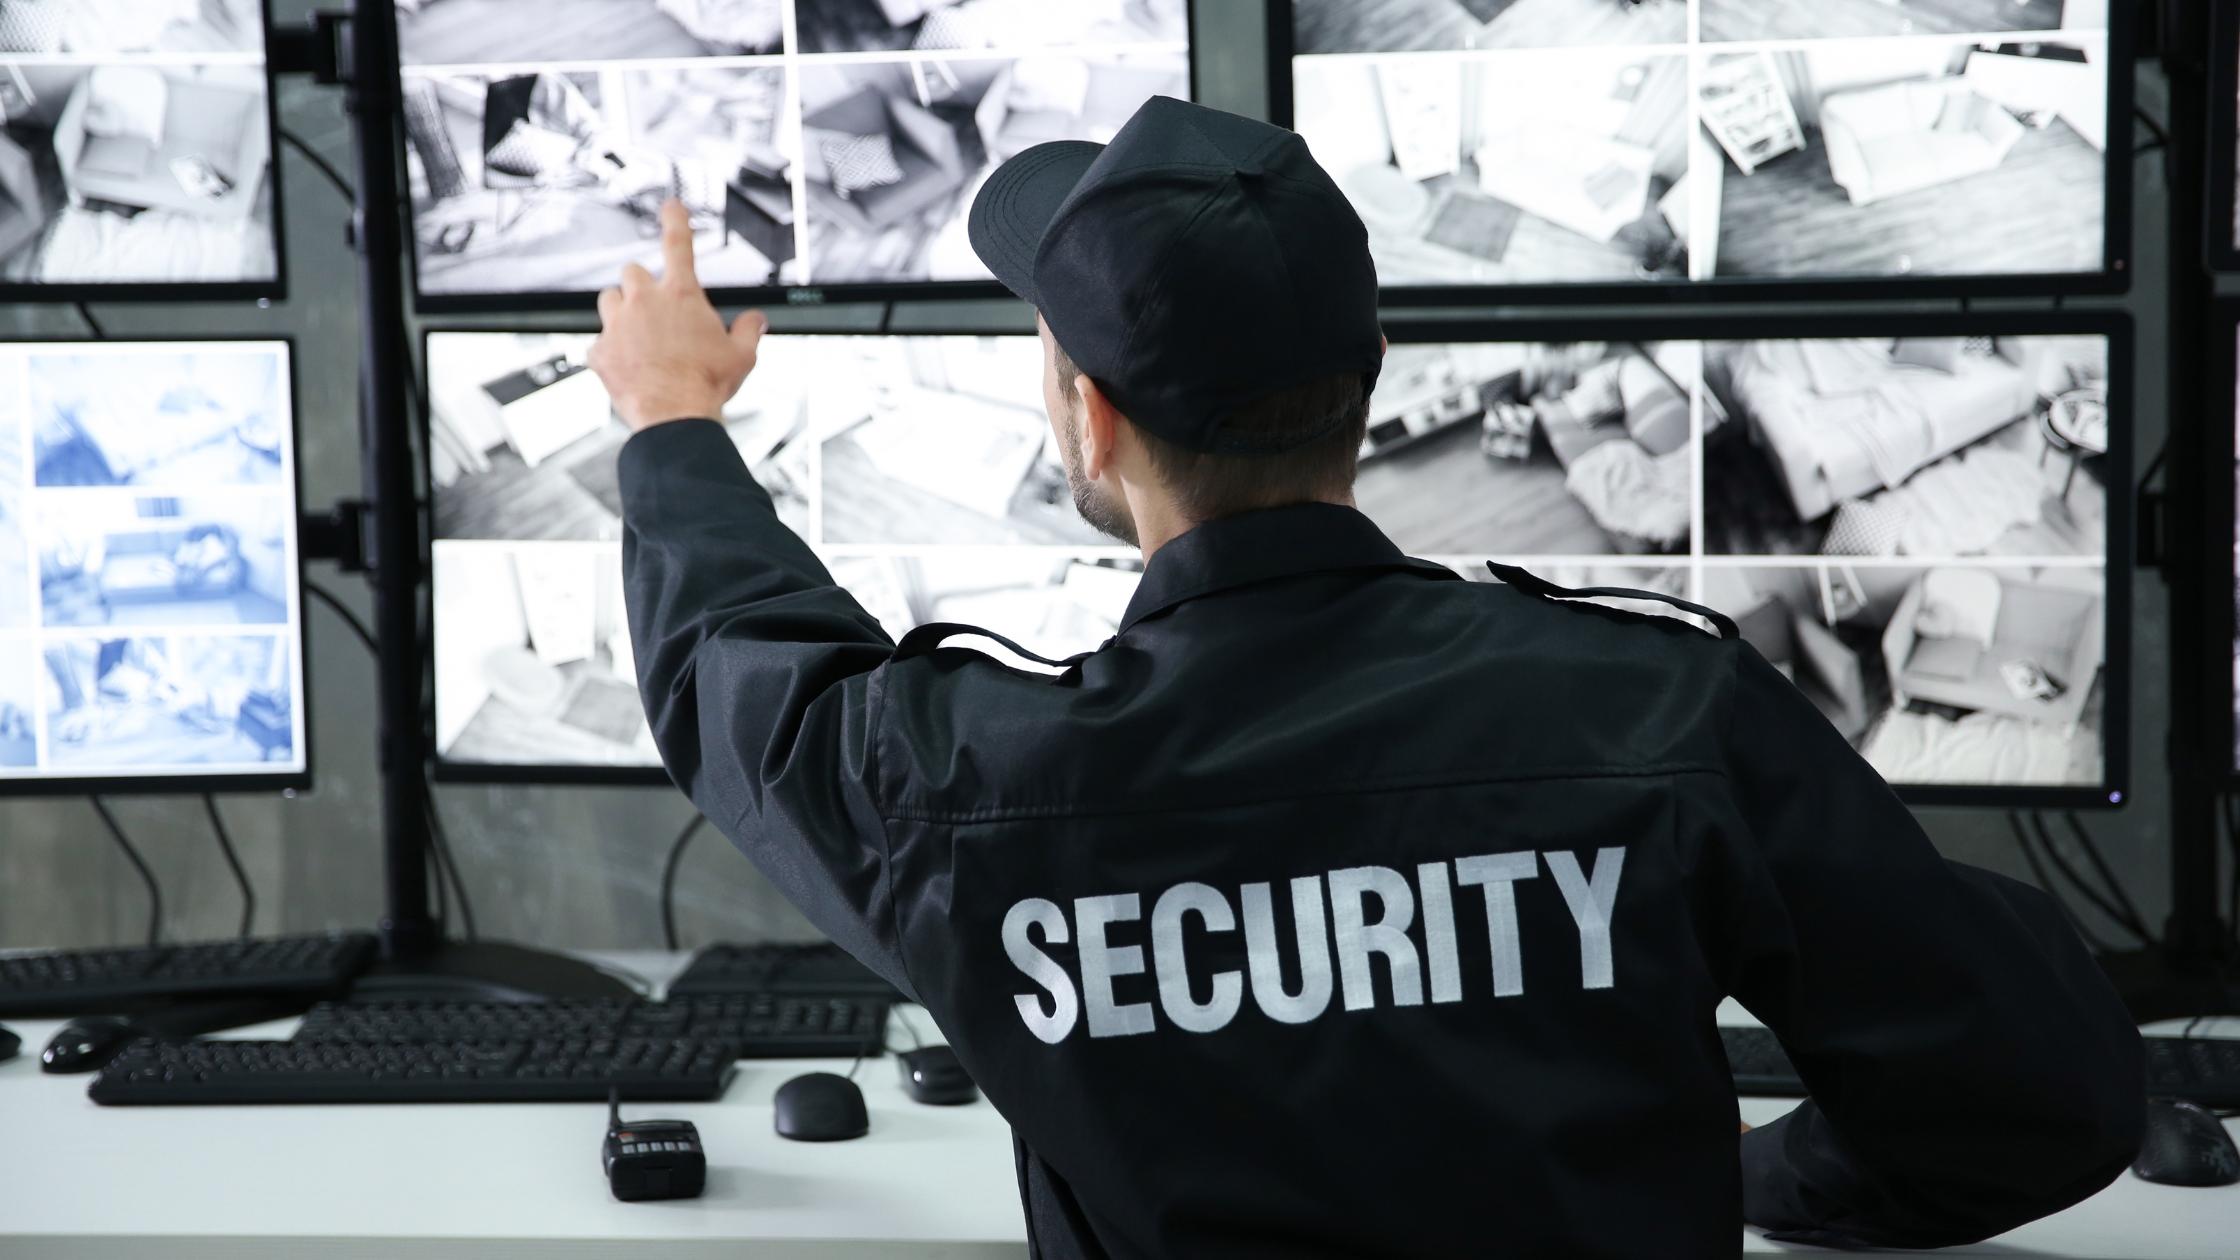 Security Guard Services in London